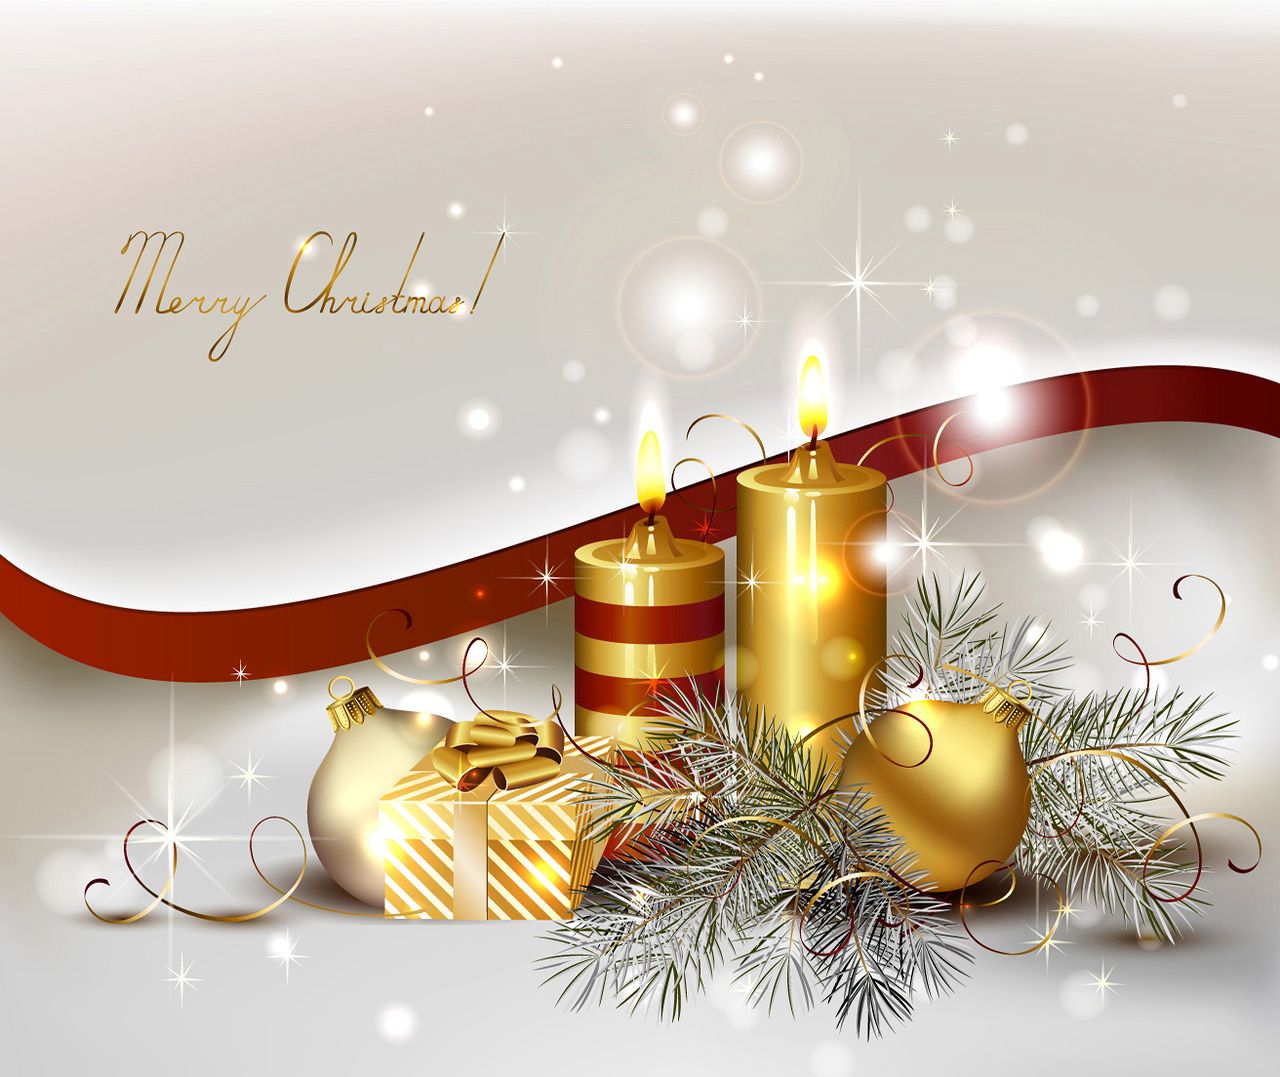 Silver Christmas Background With Gold Candles Quality Image And Transparent PNG Free Clipart